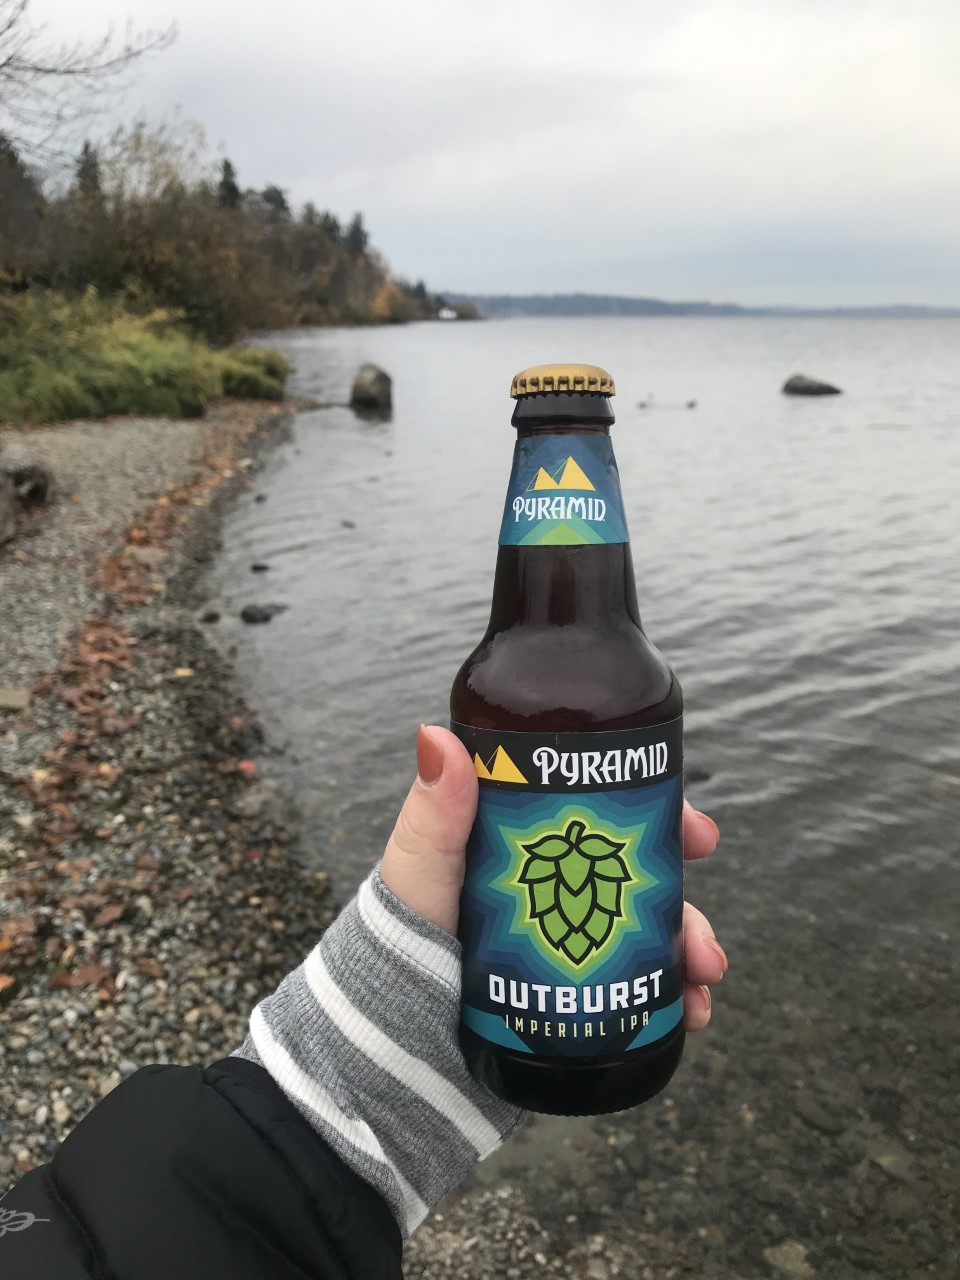 Hand holding a bottle of Pyramid Outburst IPA in front of a calm shoreline, with an overcast sky and treeline in the background.